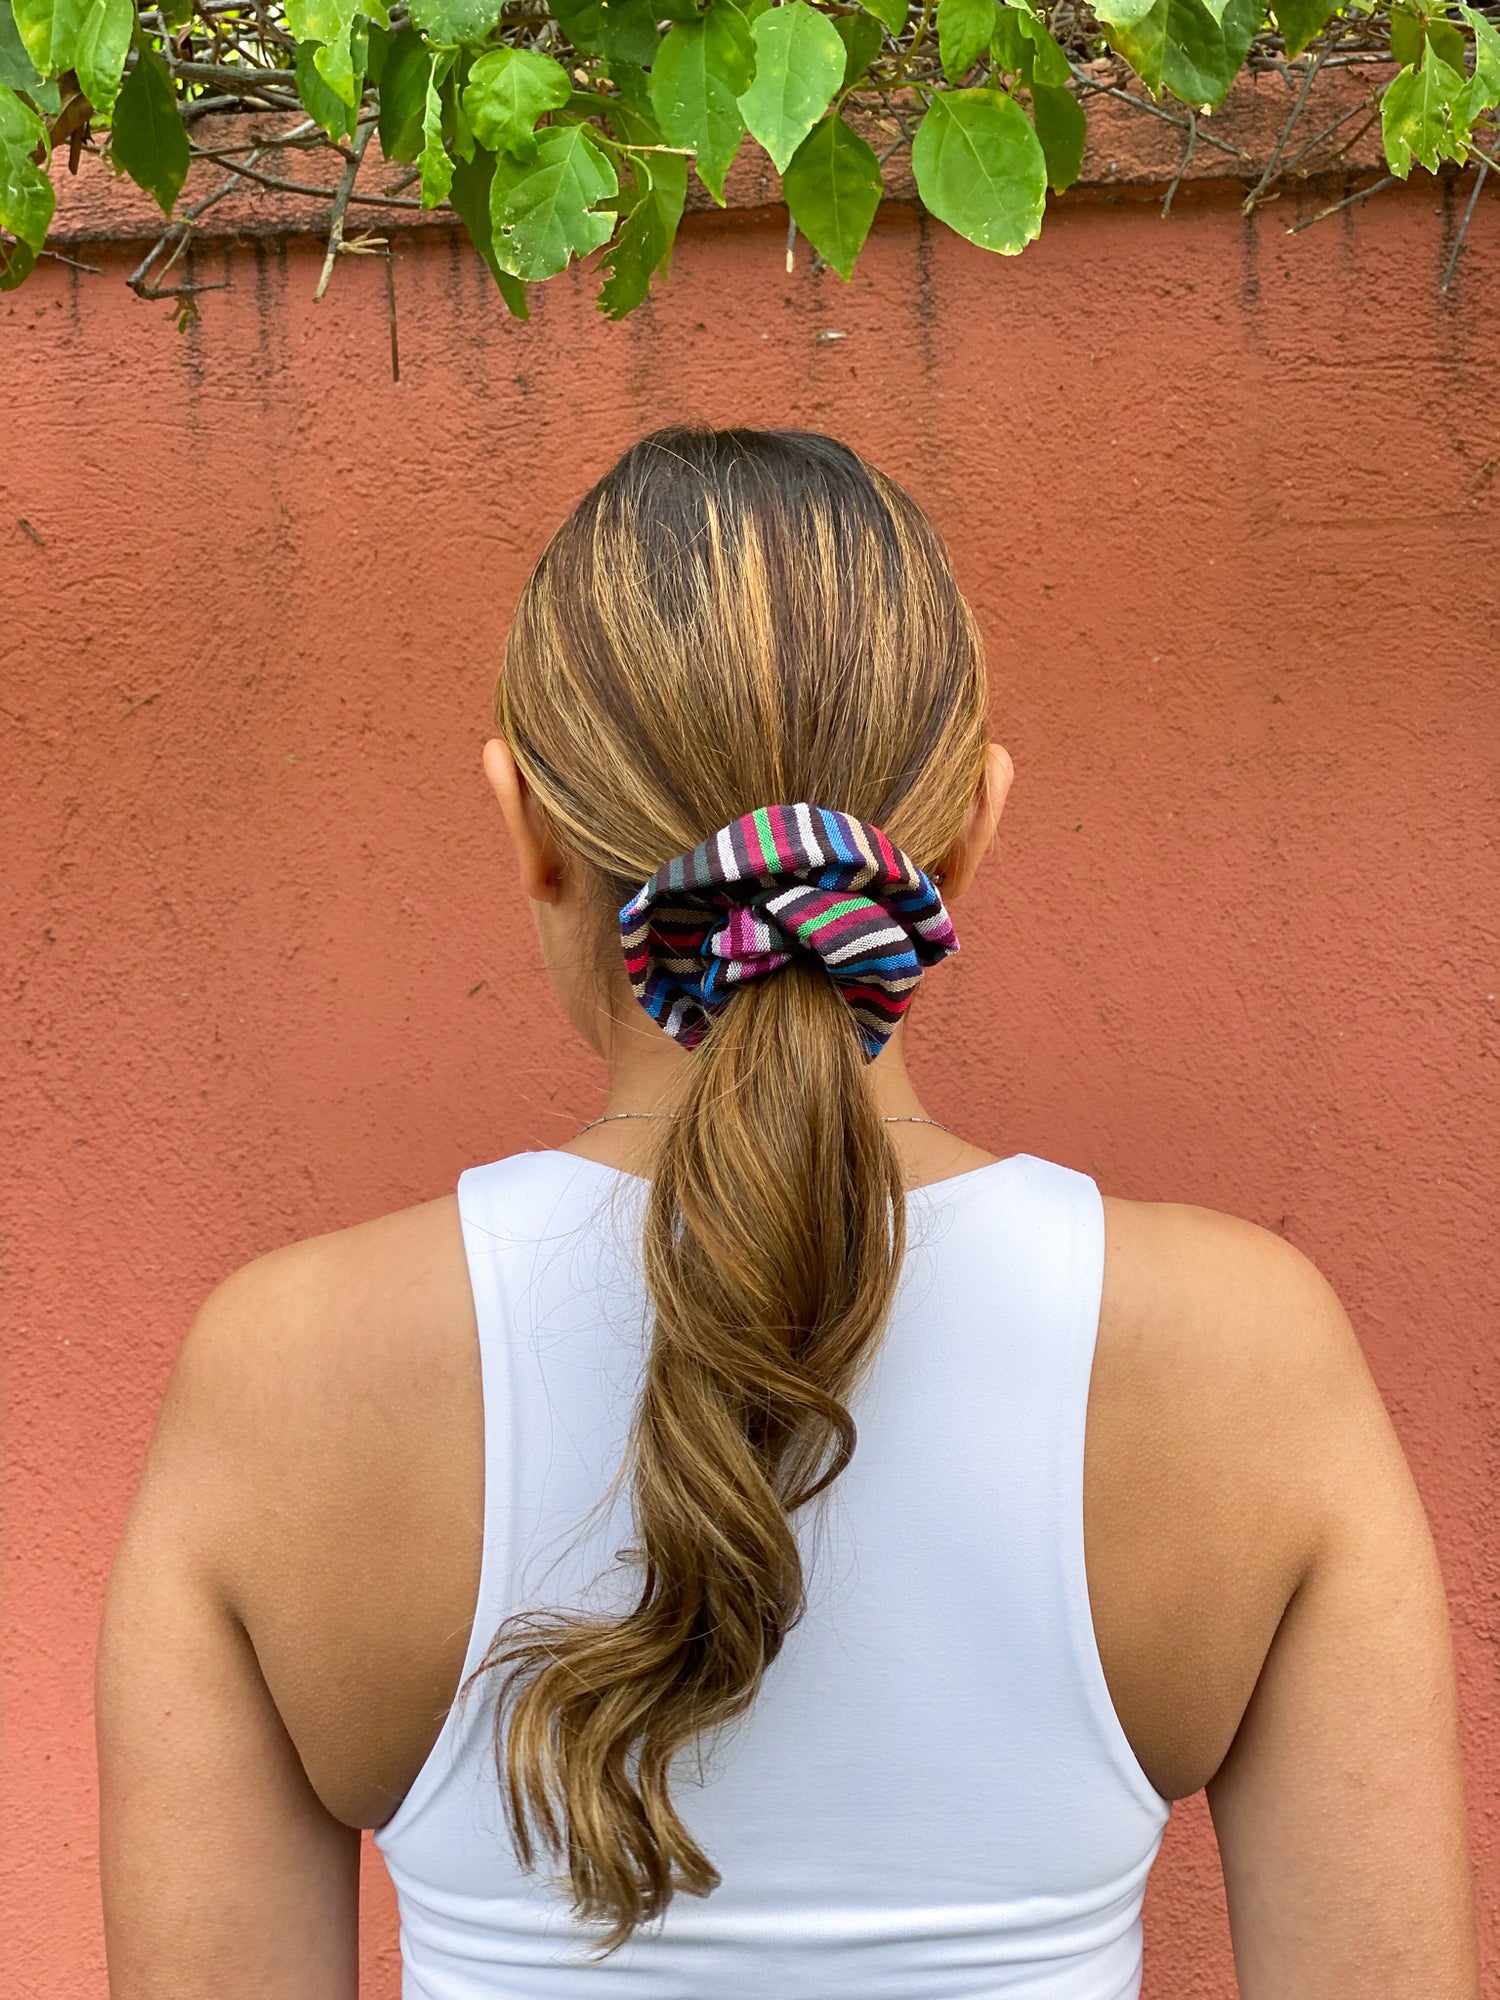 Handmade Hair Scrunchies Hair Bands Scrunchy Hair Ties . Handmade in Guatemala. Great for women's and girls for all ages. Handwoven Intricate Fabric Available in 3 different styles.